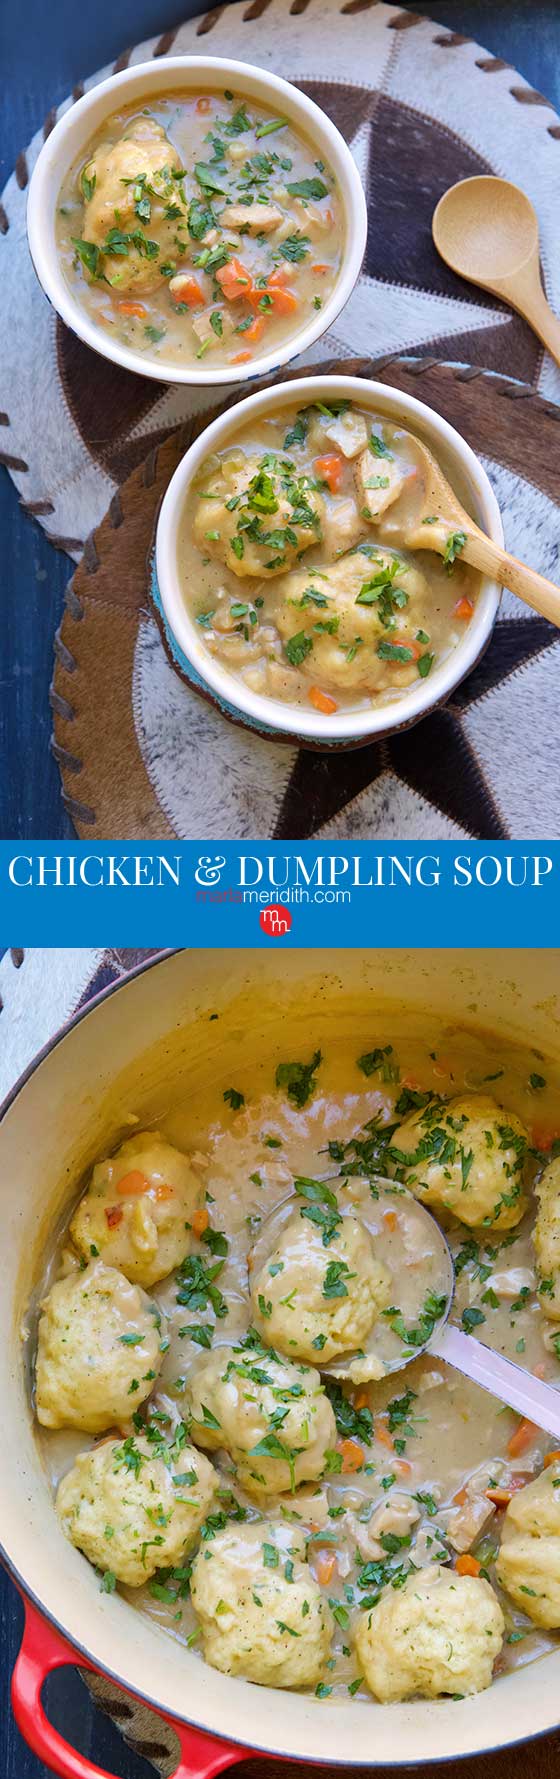 The MOST DELICIOUS Chicken & Dumpling Soup recipe you will ever eat! The perfect way to warm up on a chilly fall or winters day. MarlaMeridith.com